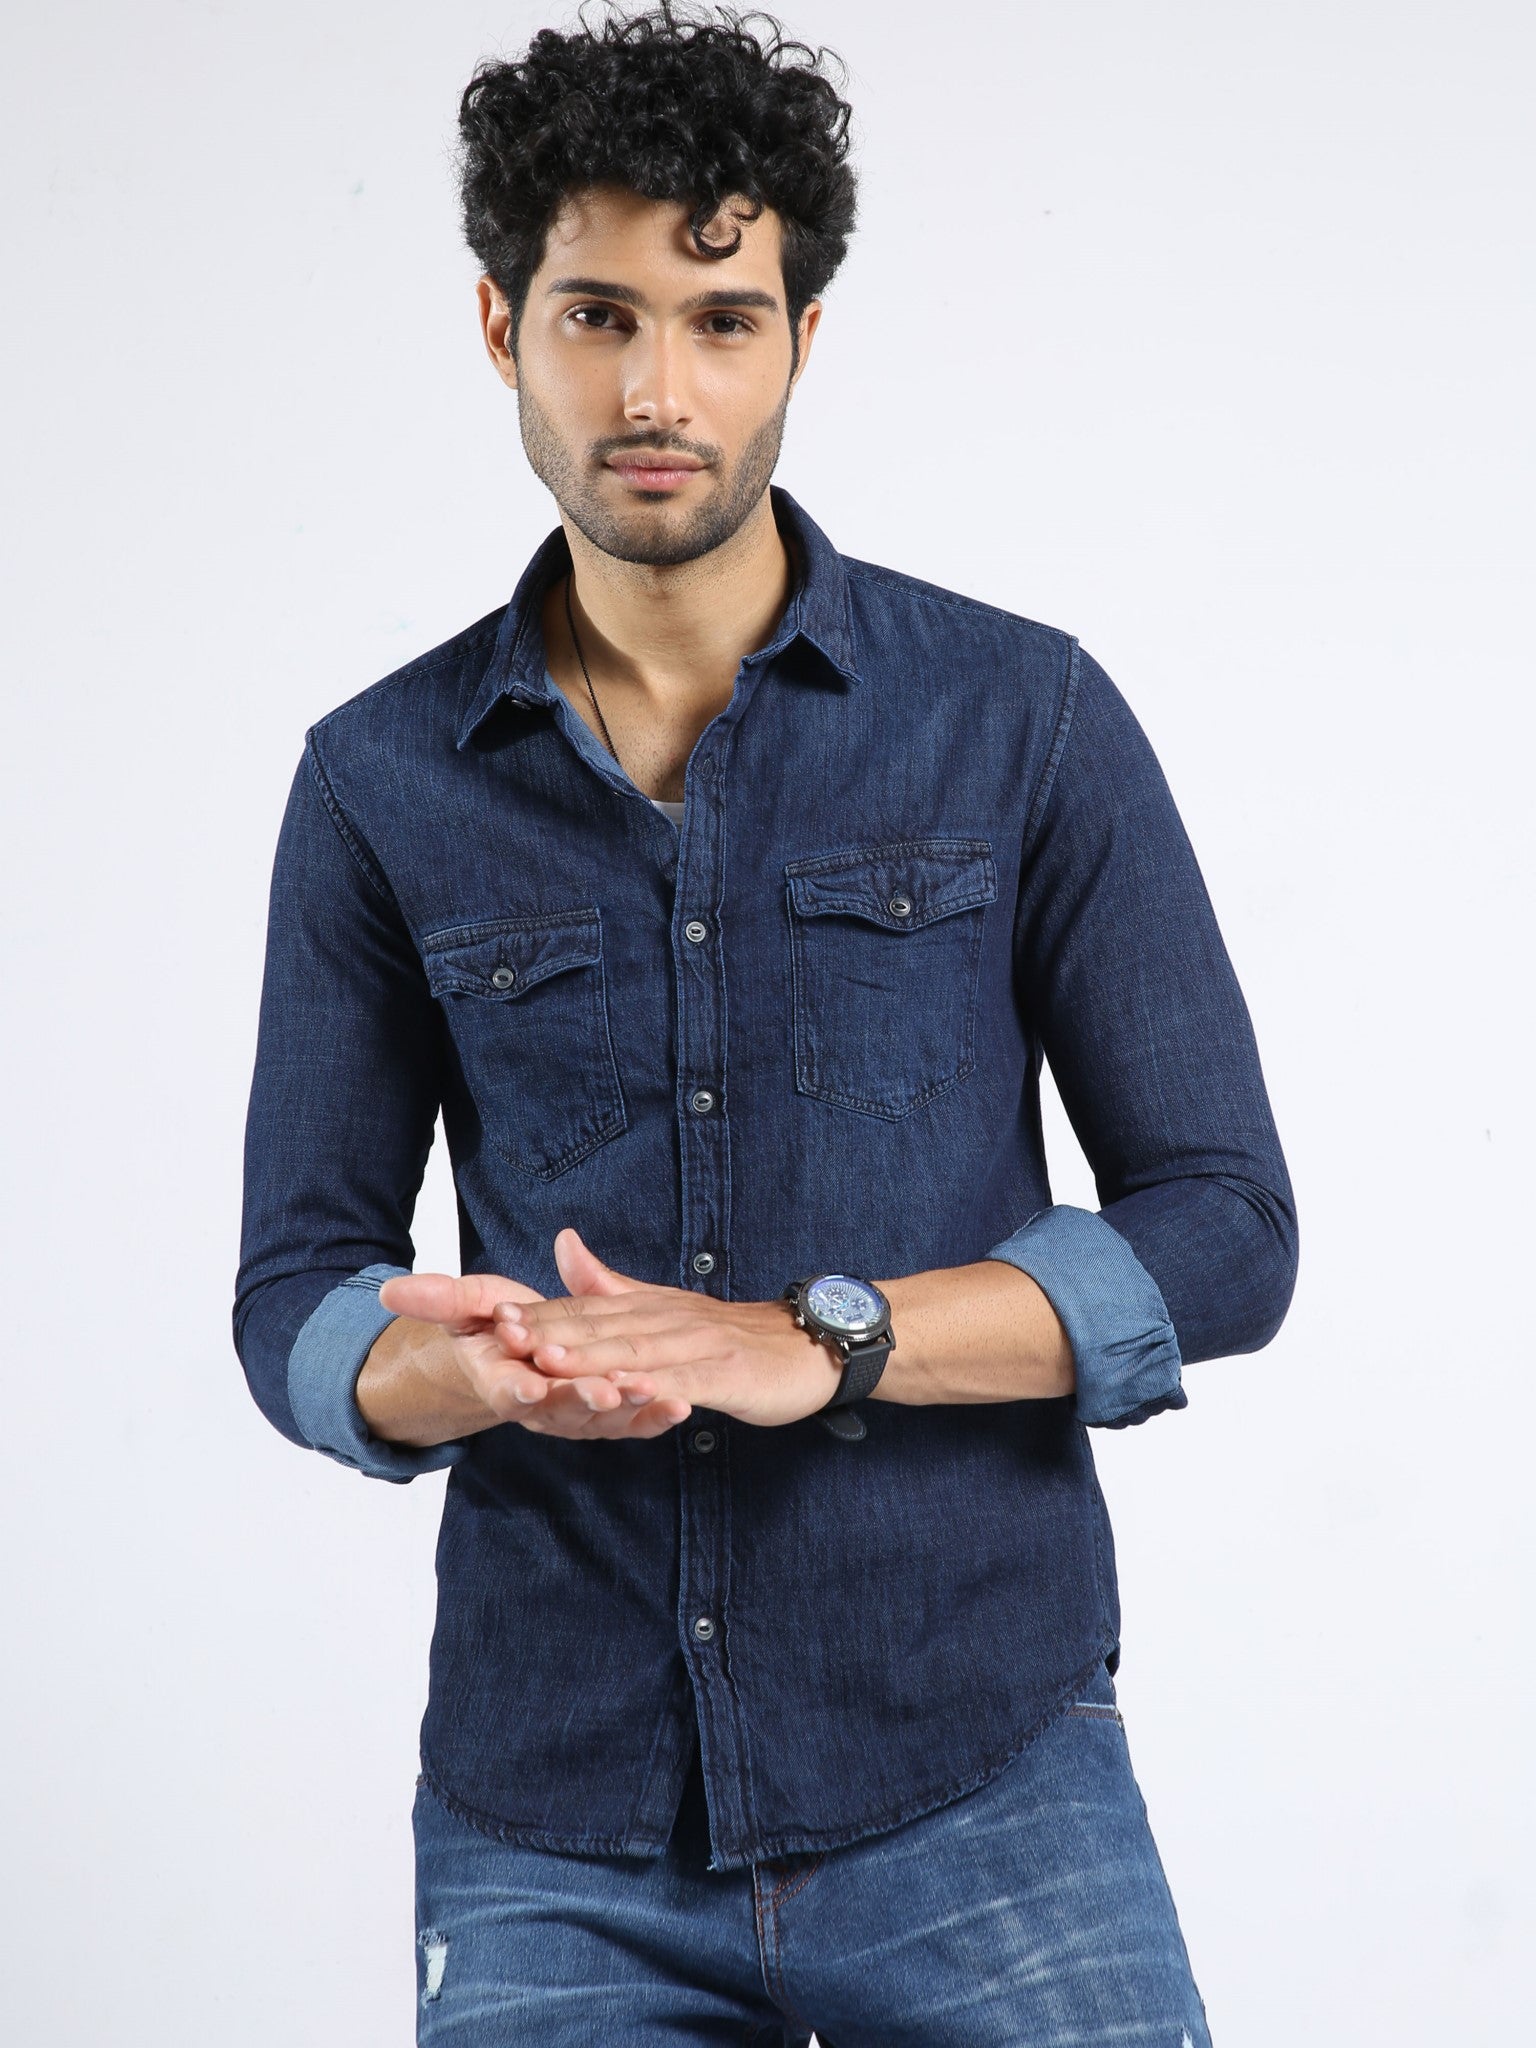 Blue Jean Outfit for Men | Style Blue Jeans Outfits for Men and Women By  Paul Brown